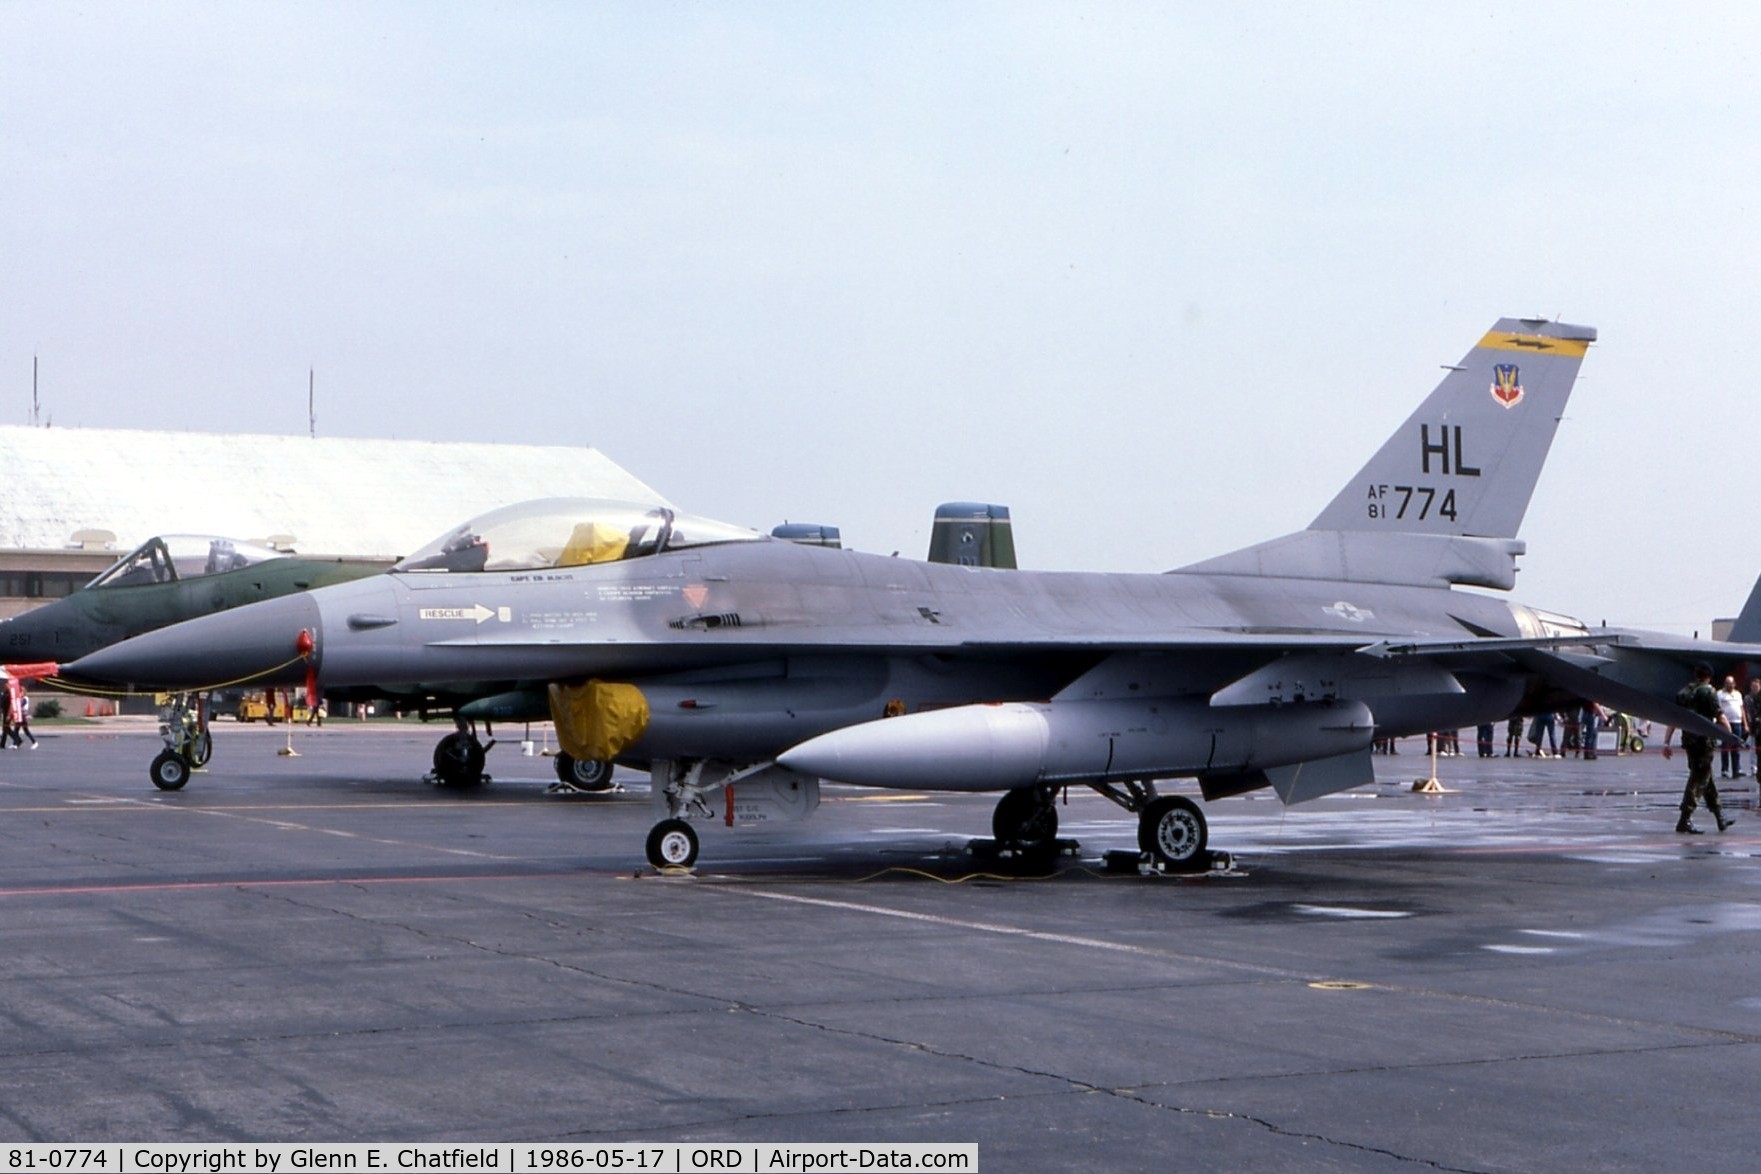 81-0774, 1981 General Dynamics F-16A Fighting Falcon C/N 61-455, F-16A at the AFR/ANG open house